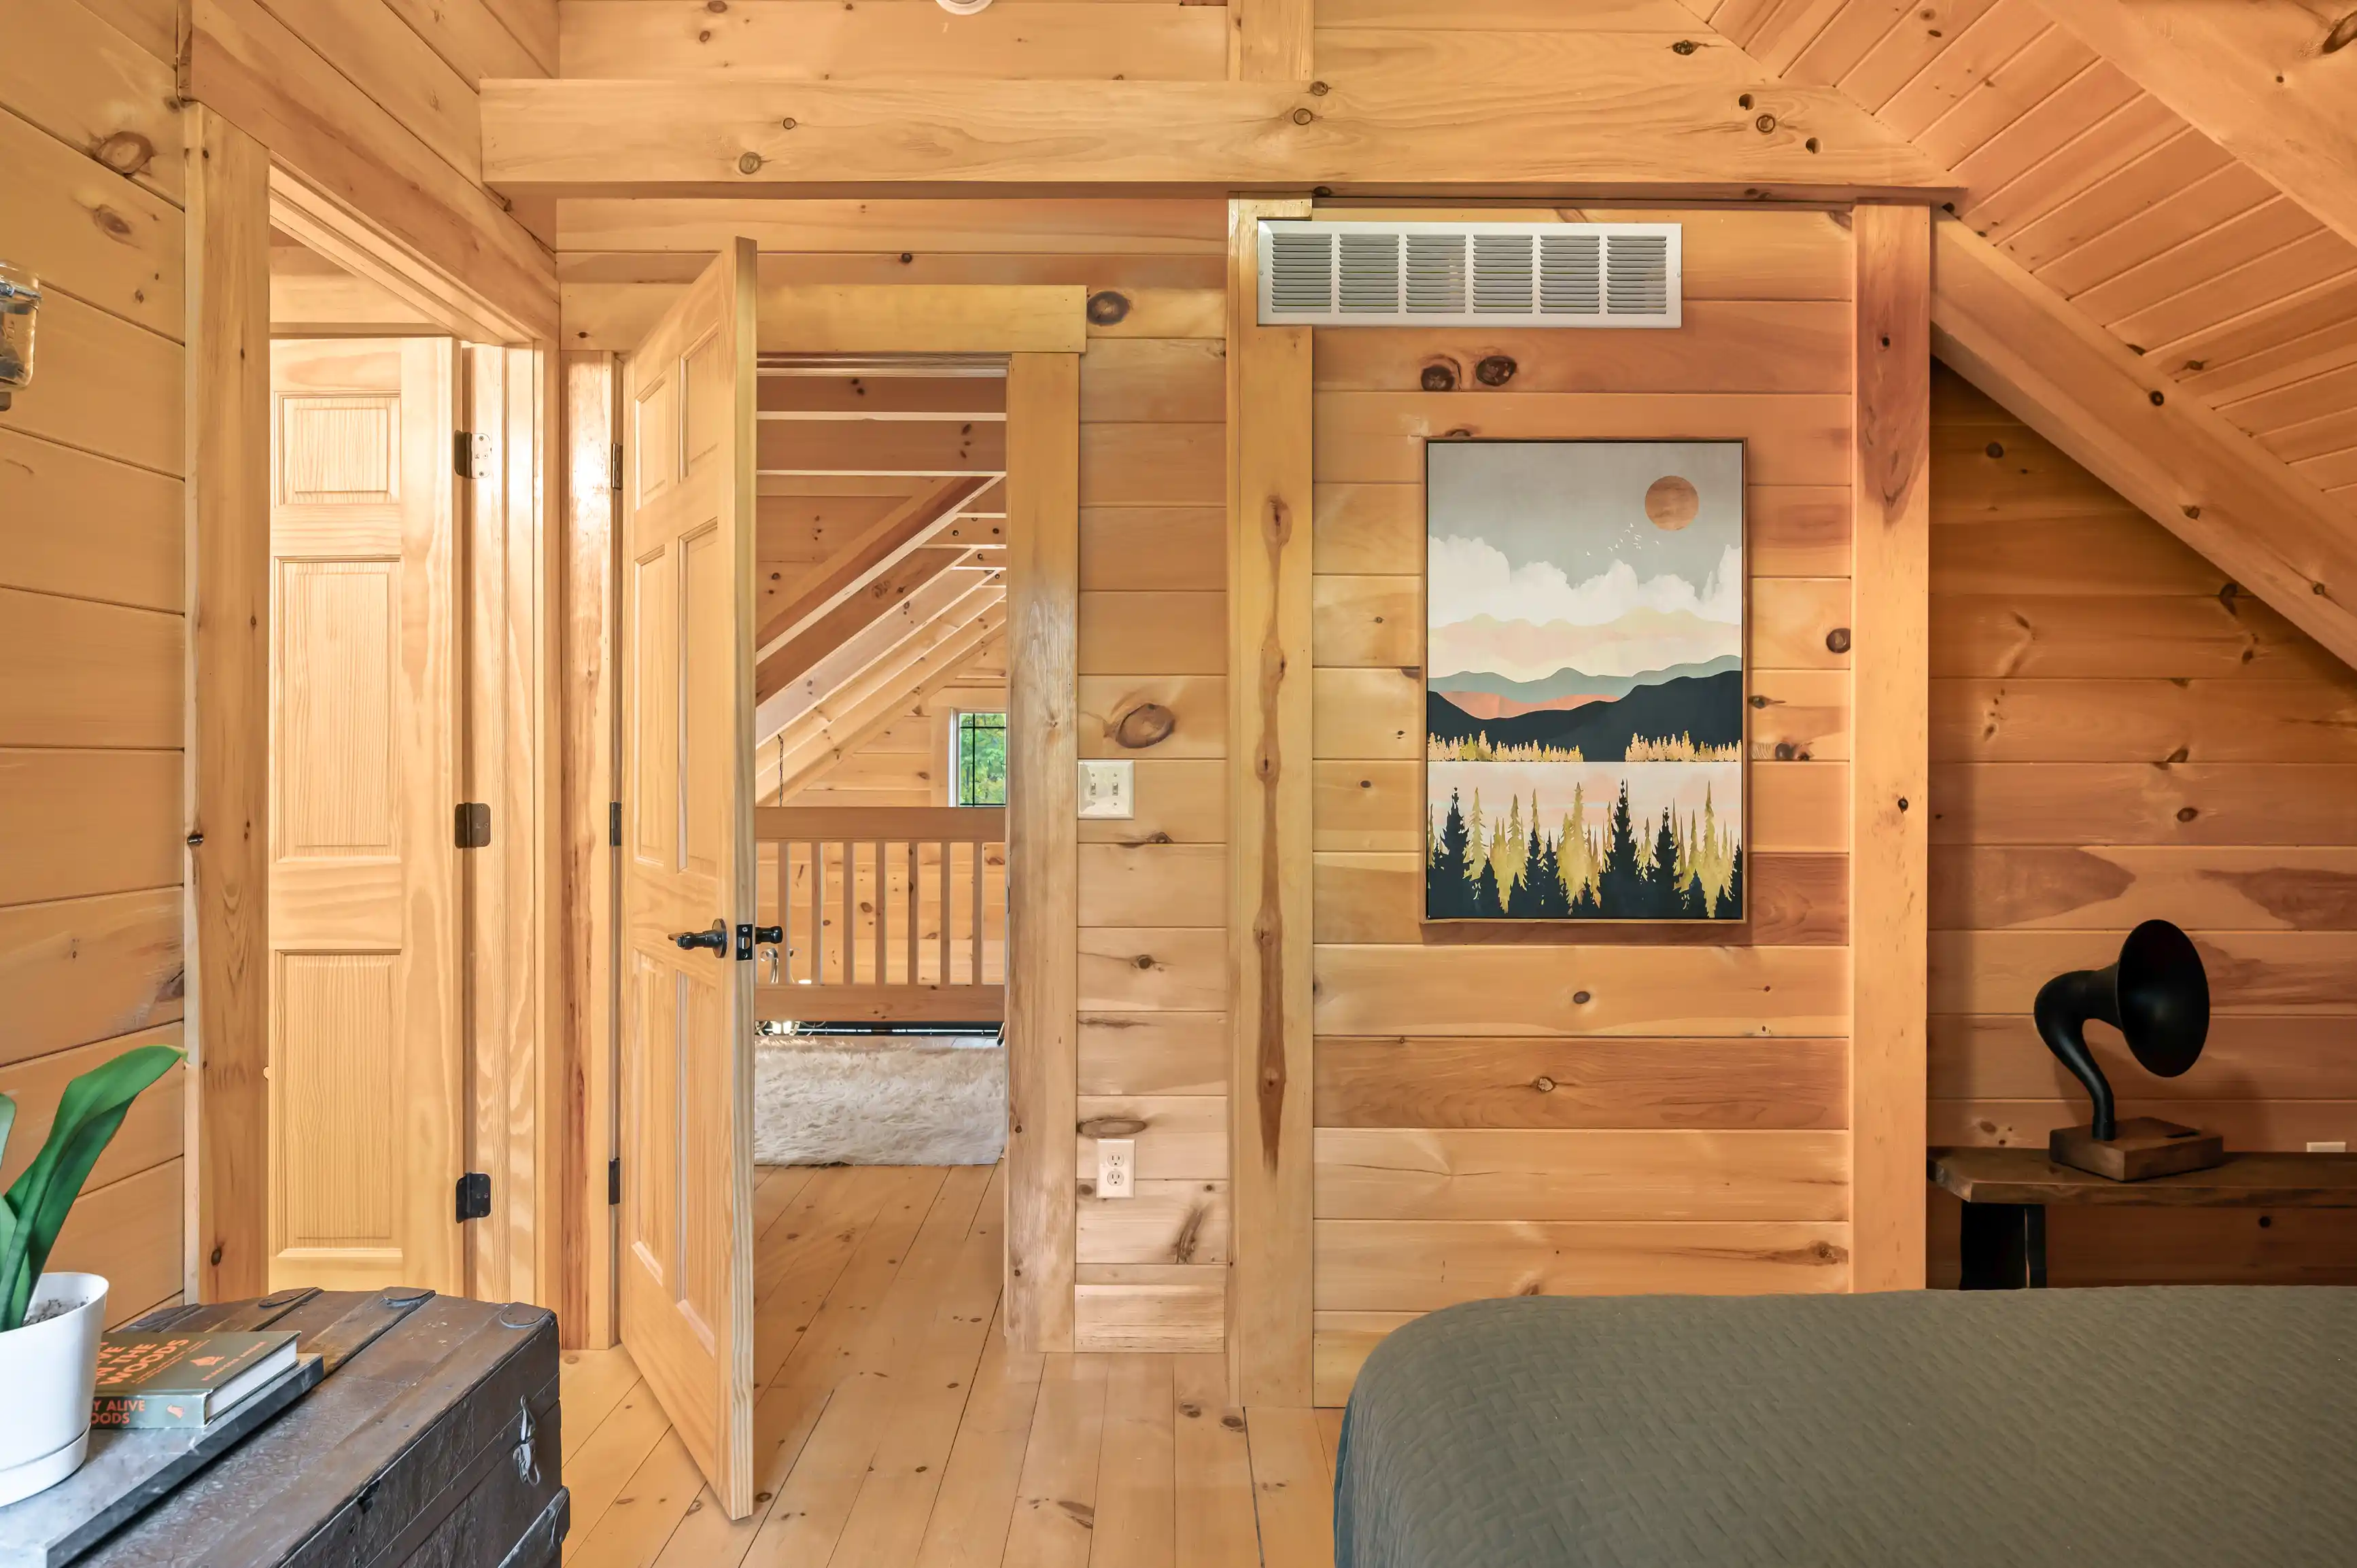 Interior of a cozy cabin with wooden walls, floors, and ceiling, featuring an open door leading to a balcony, a framed landscape painting, and a bed with a grey cover.